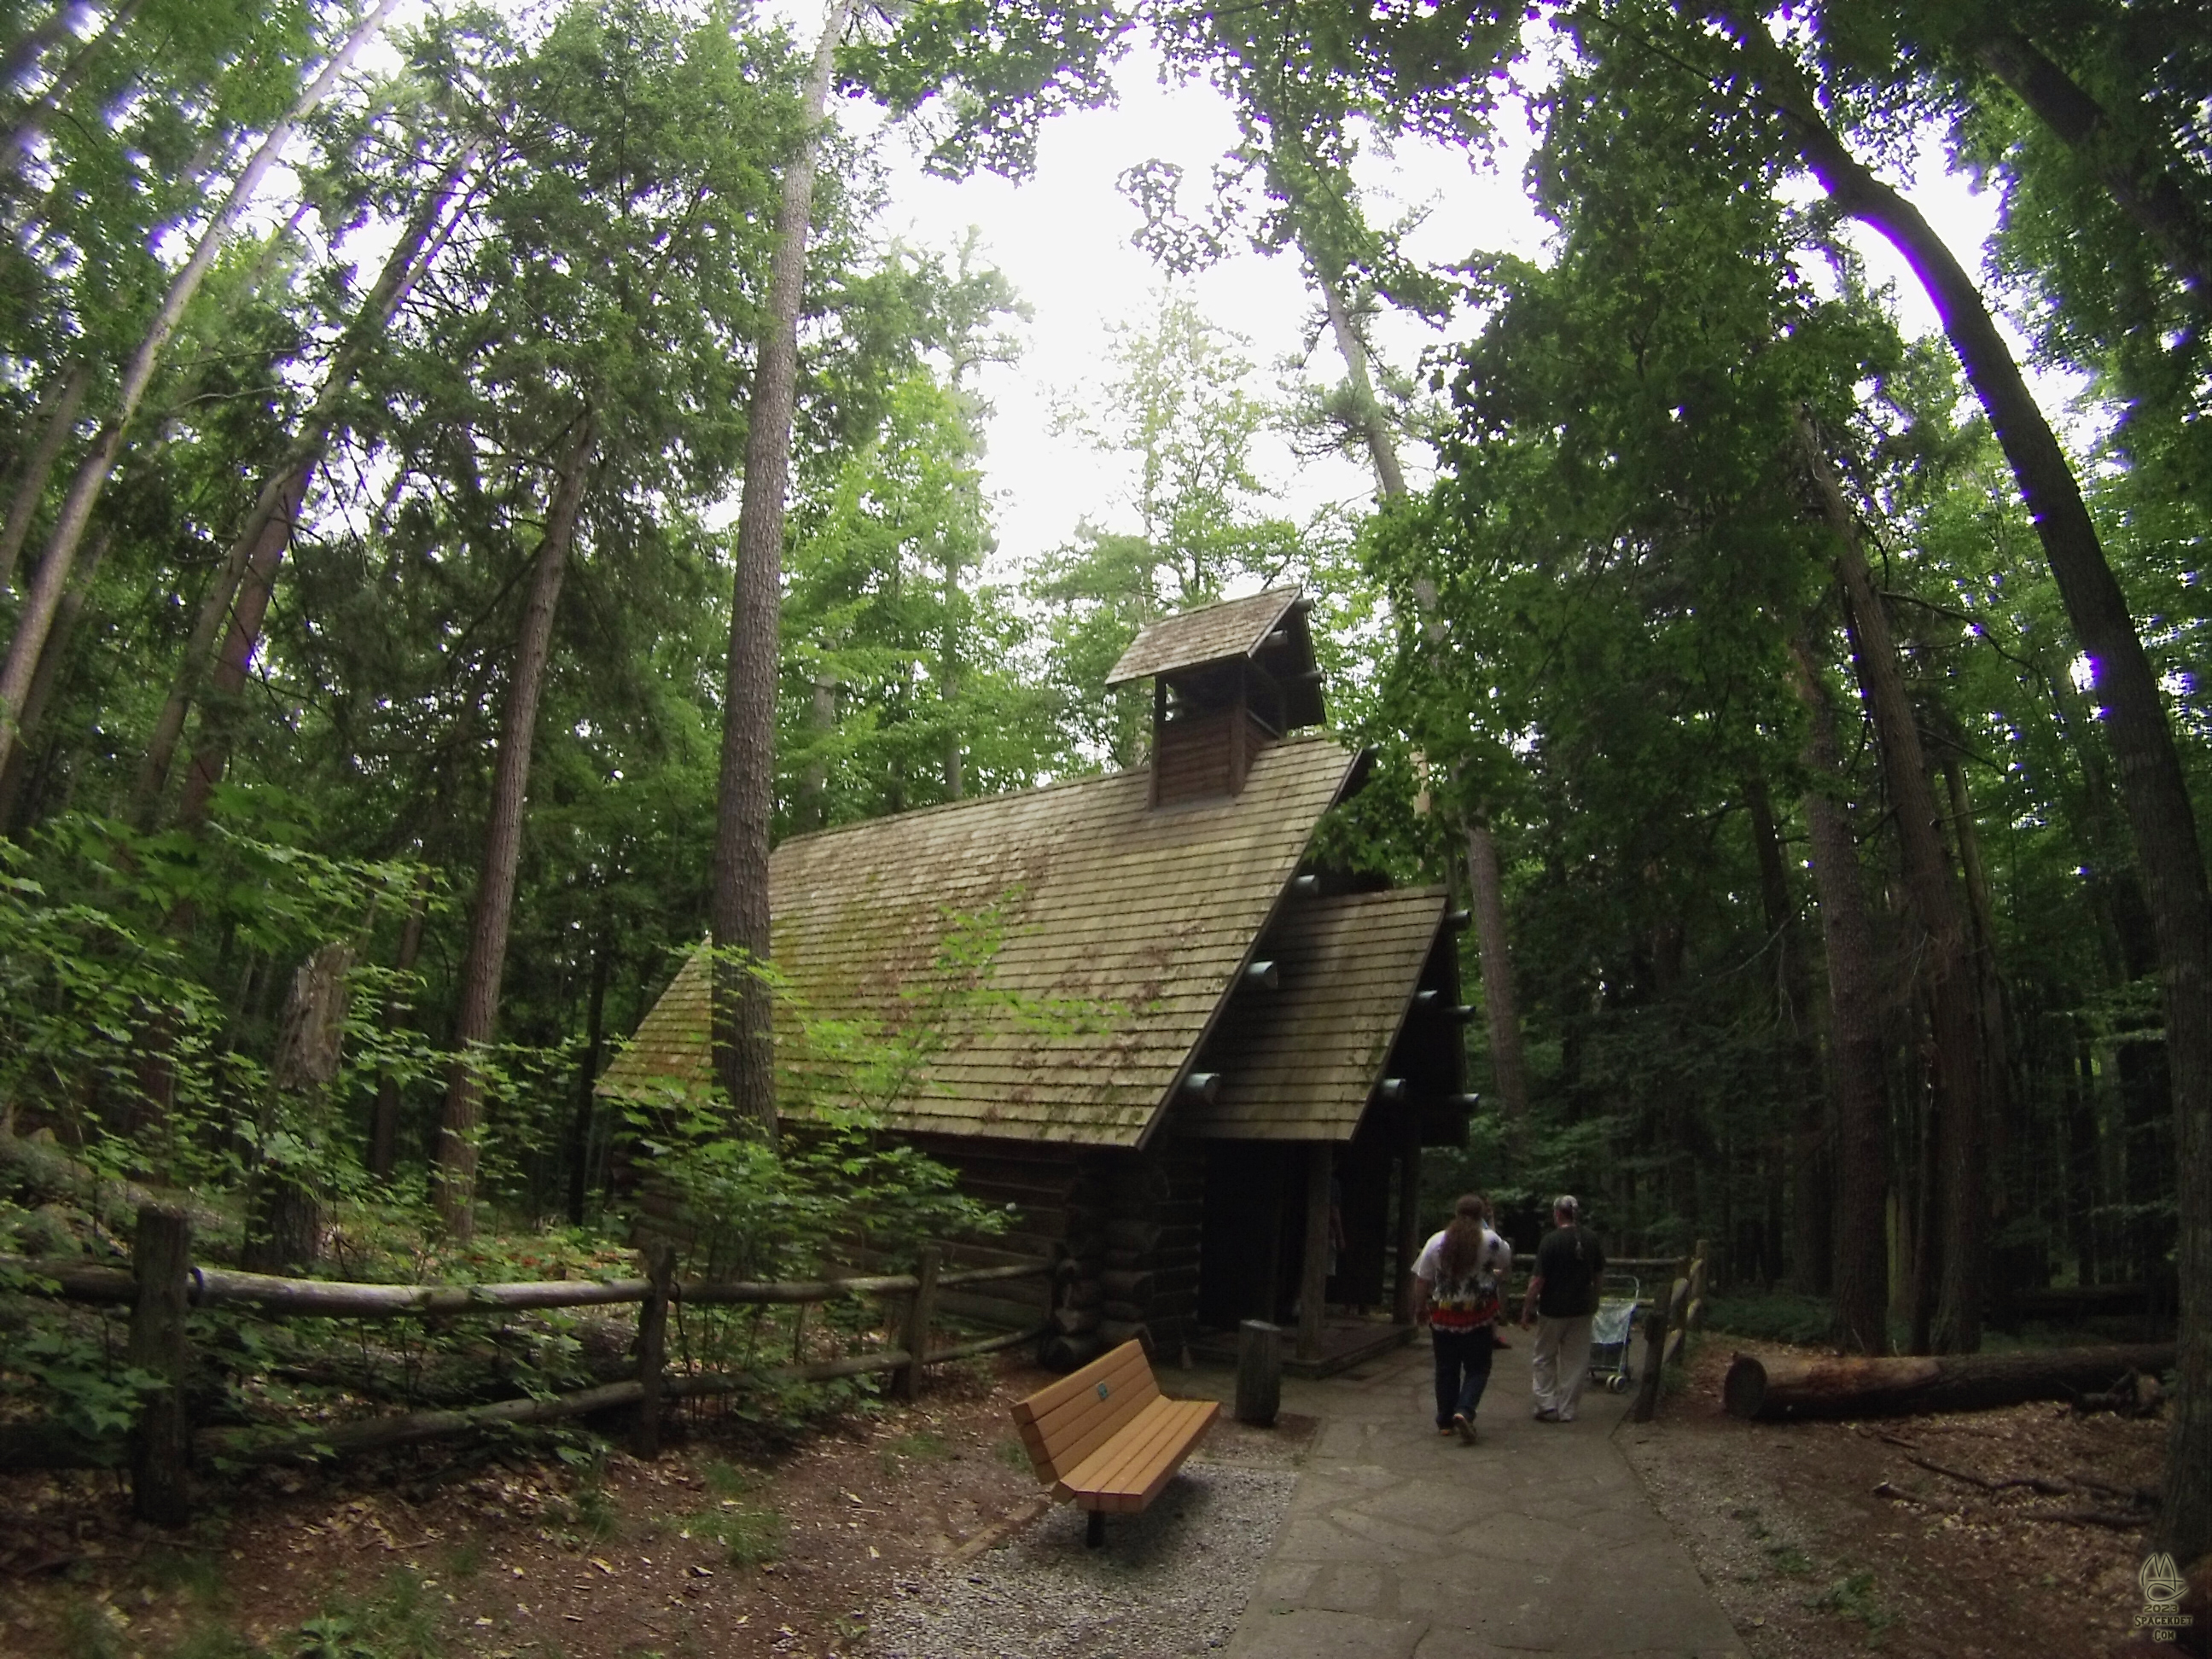 Chapel In The Pines, Hartwick Pines State Park. GoPro photo from 2014.